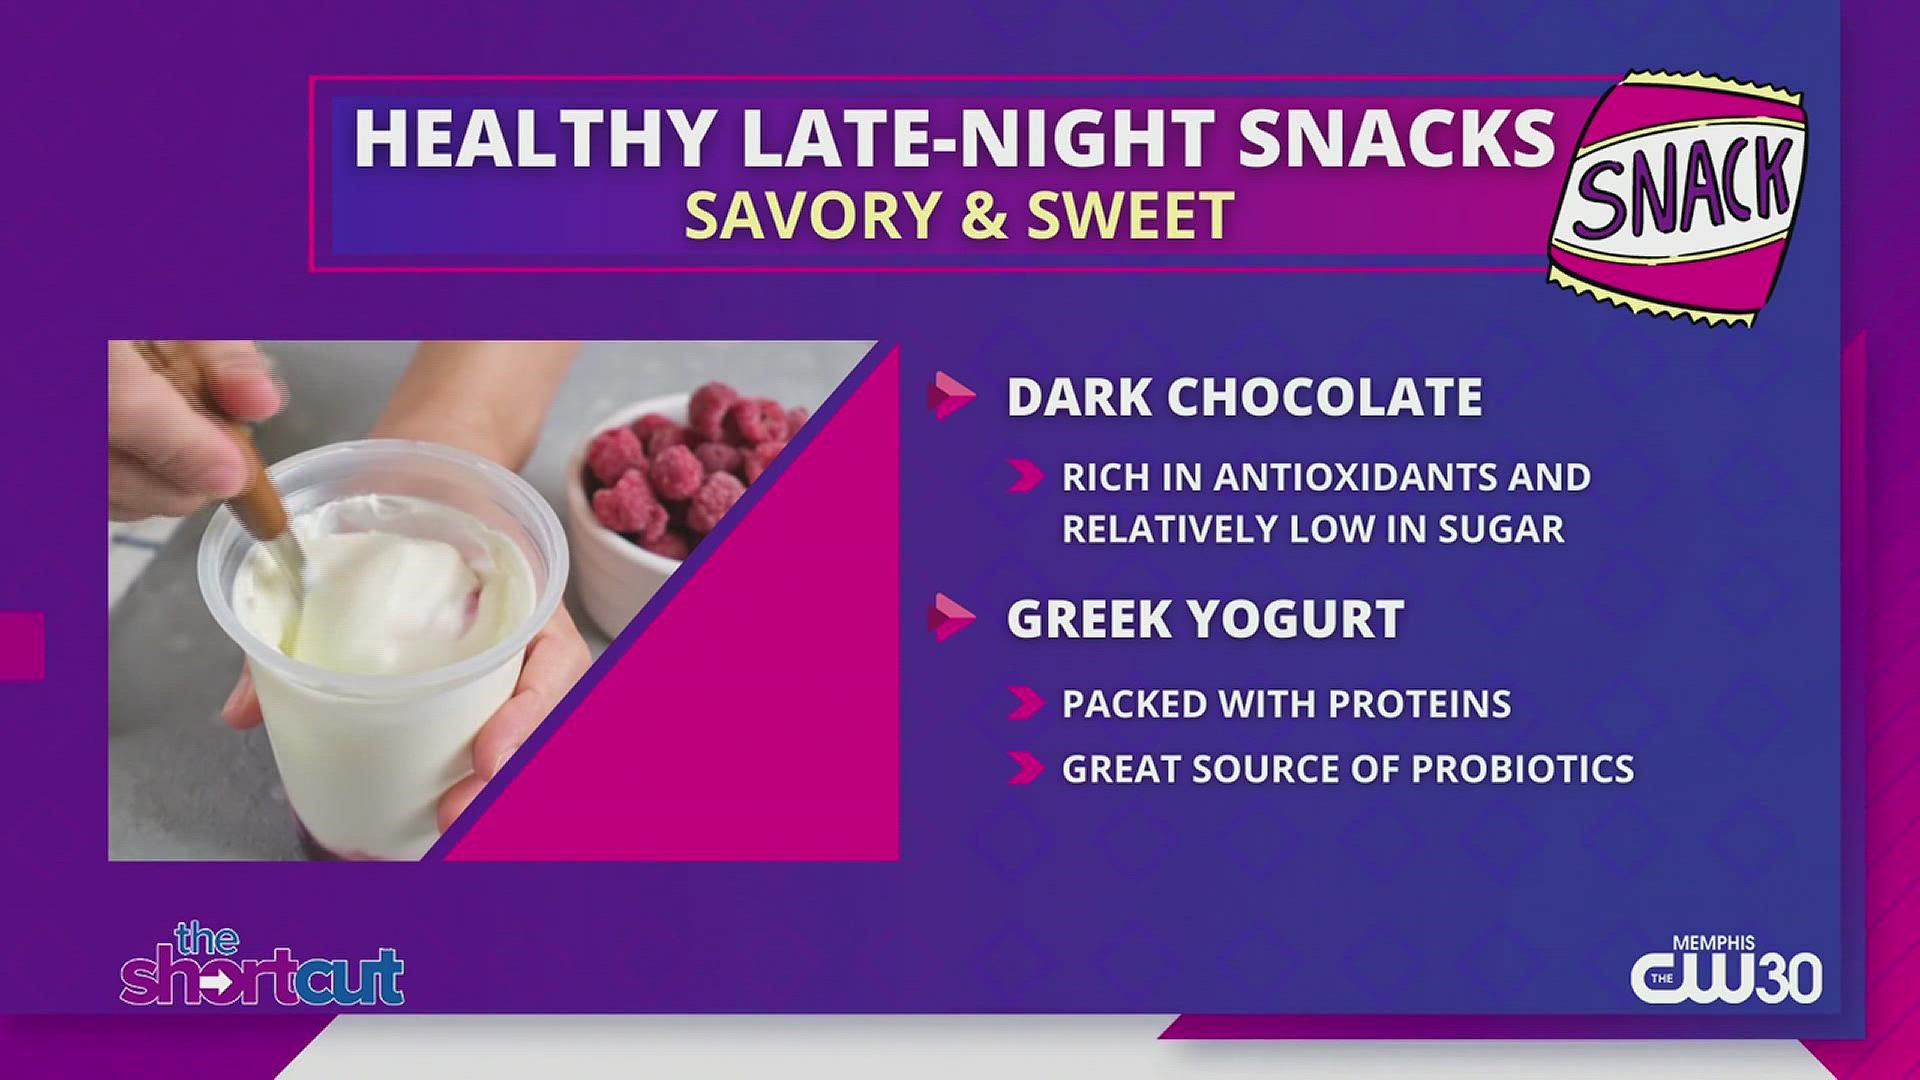 Did you know that Greek yogurt is linked to insomniac relief? Find out more and other healthy snack and sleeping tips for parents right here on "The Shortcut!"